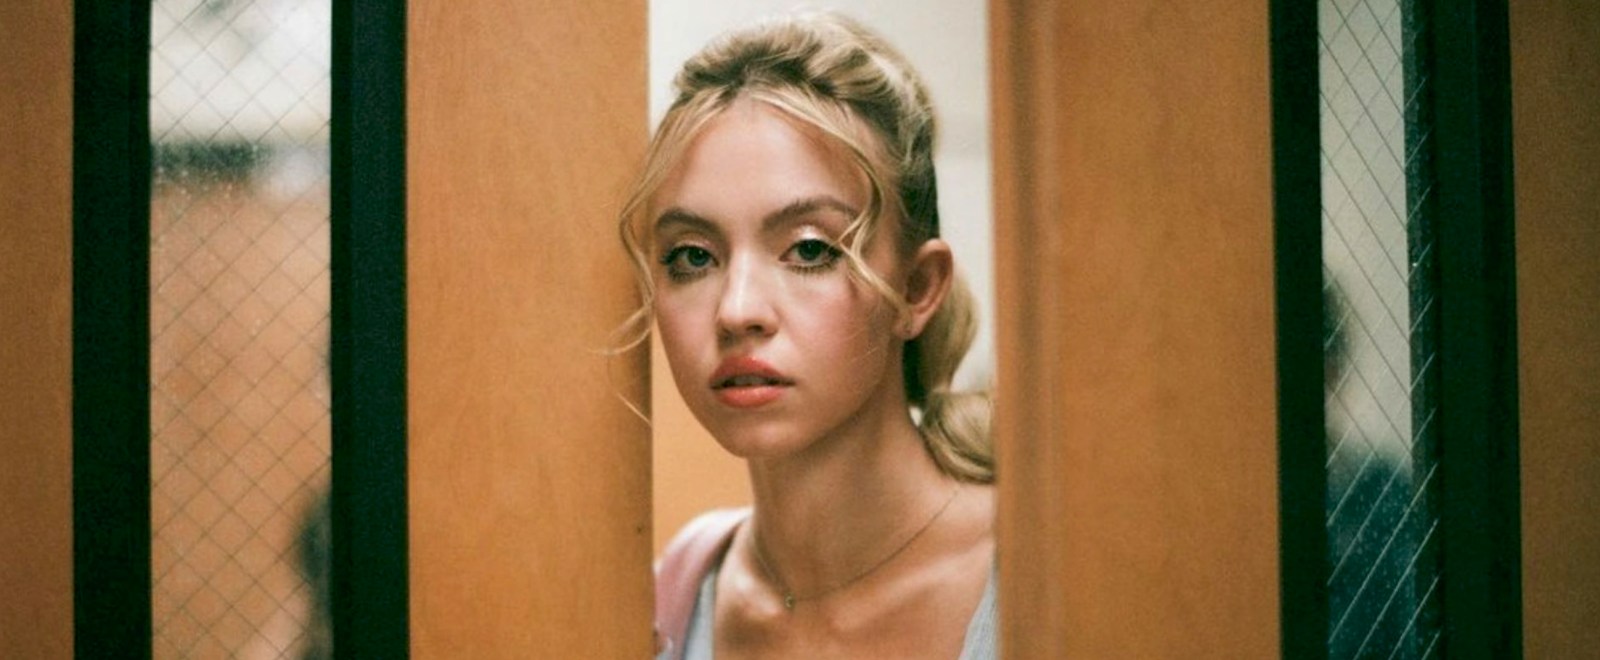 Sydney Sweeney Opened Up About Having ‘No Control’ Over The ‘Weird’ Way People Discuss Her Body